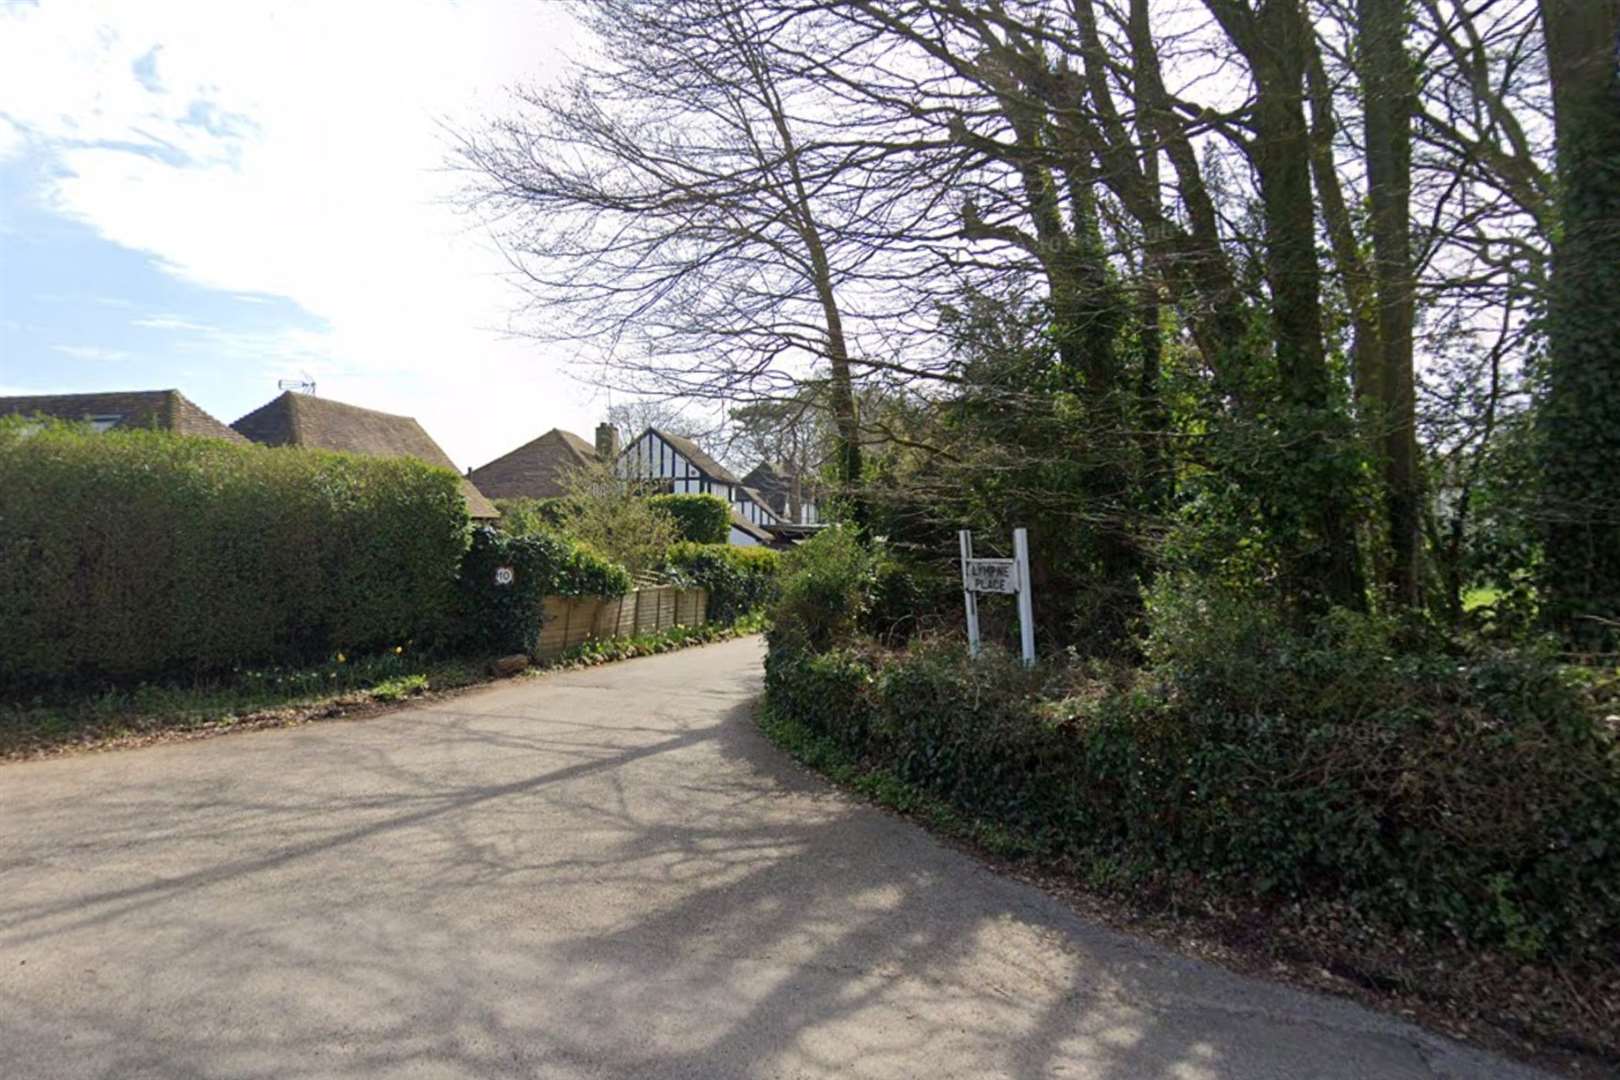 The company also provides services in east Kent based out of Lympne, near Hythe. Picture: Google